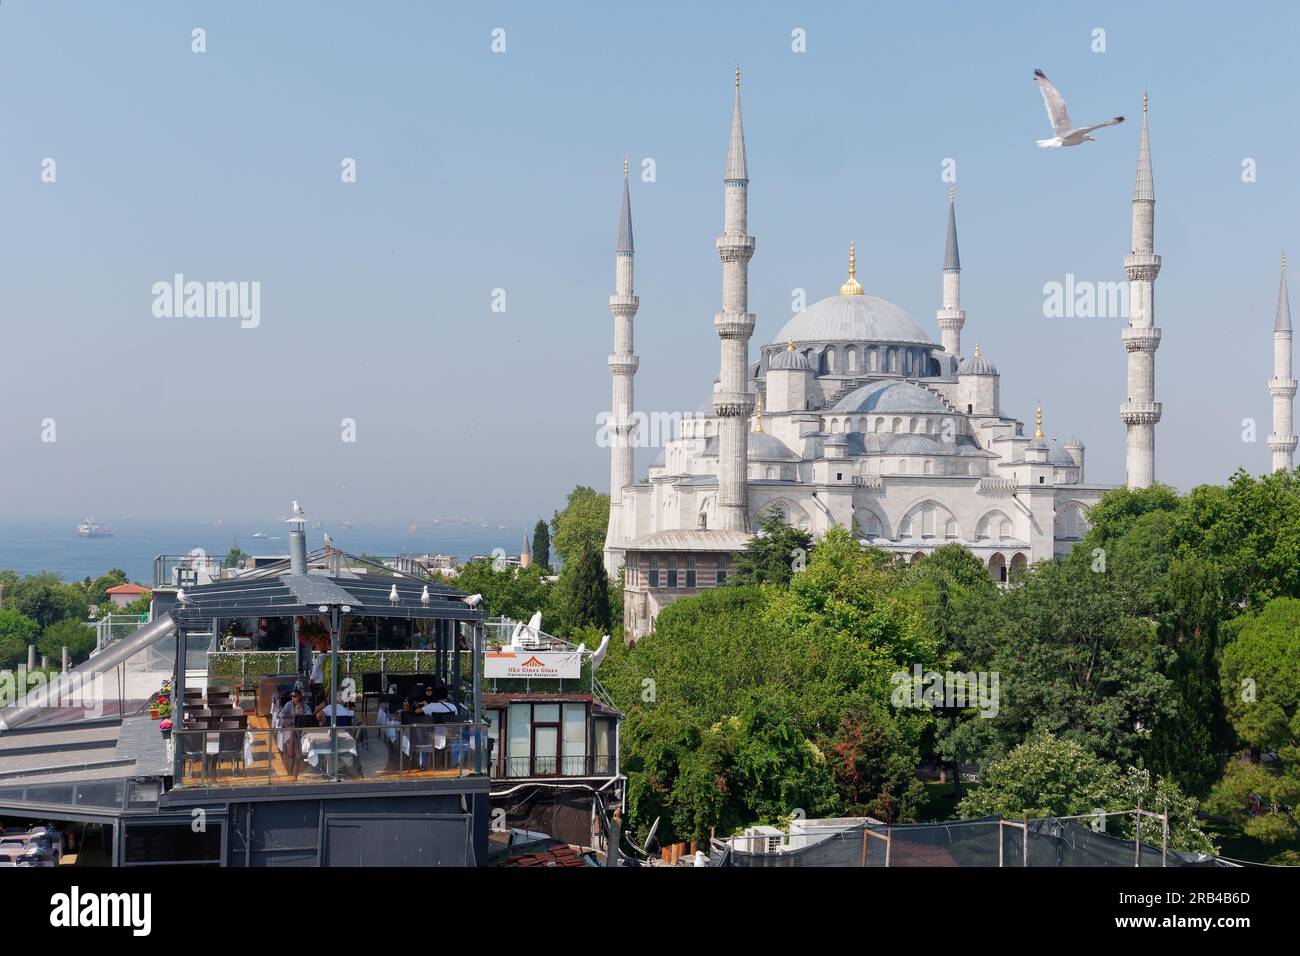 Elevated view of the Sultan Ahmed Mosque aka Blue Mosque. People dine at nearby restaurant with the Sea of Marmara behind, Istanbul, Turkey Stock Photo